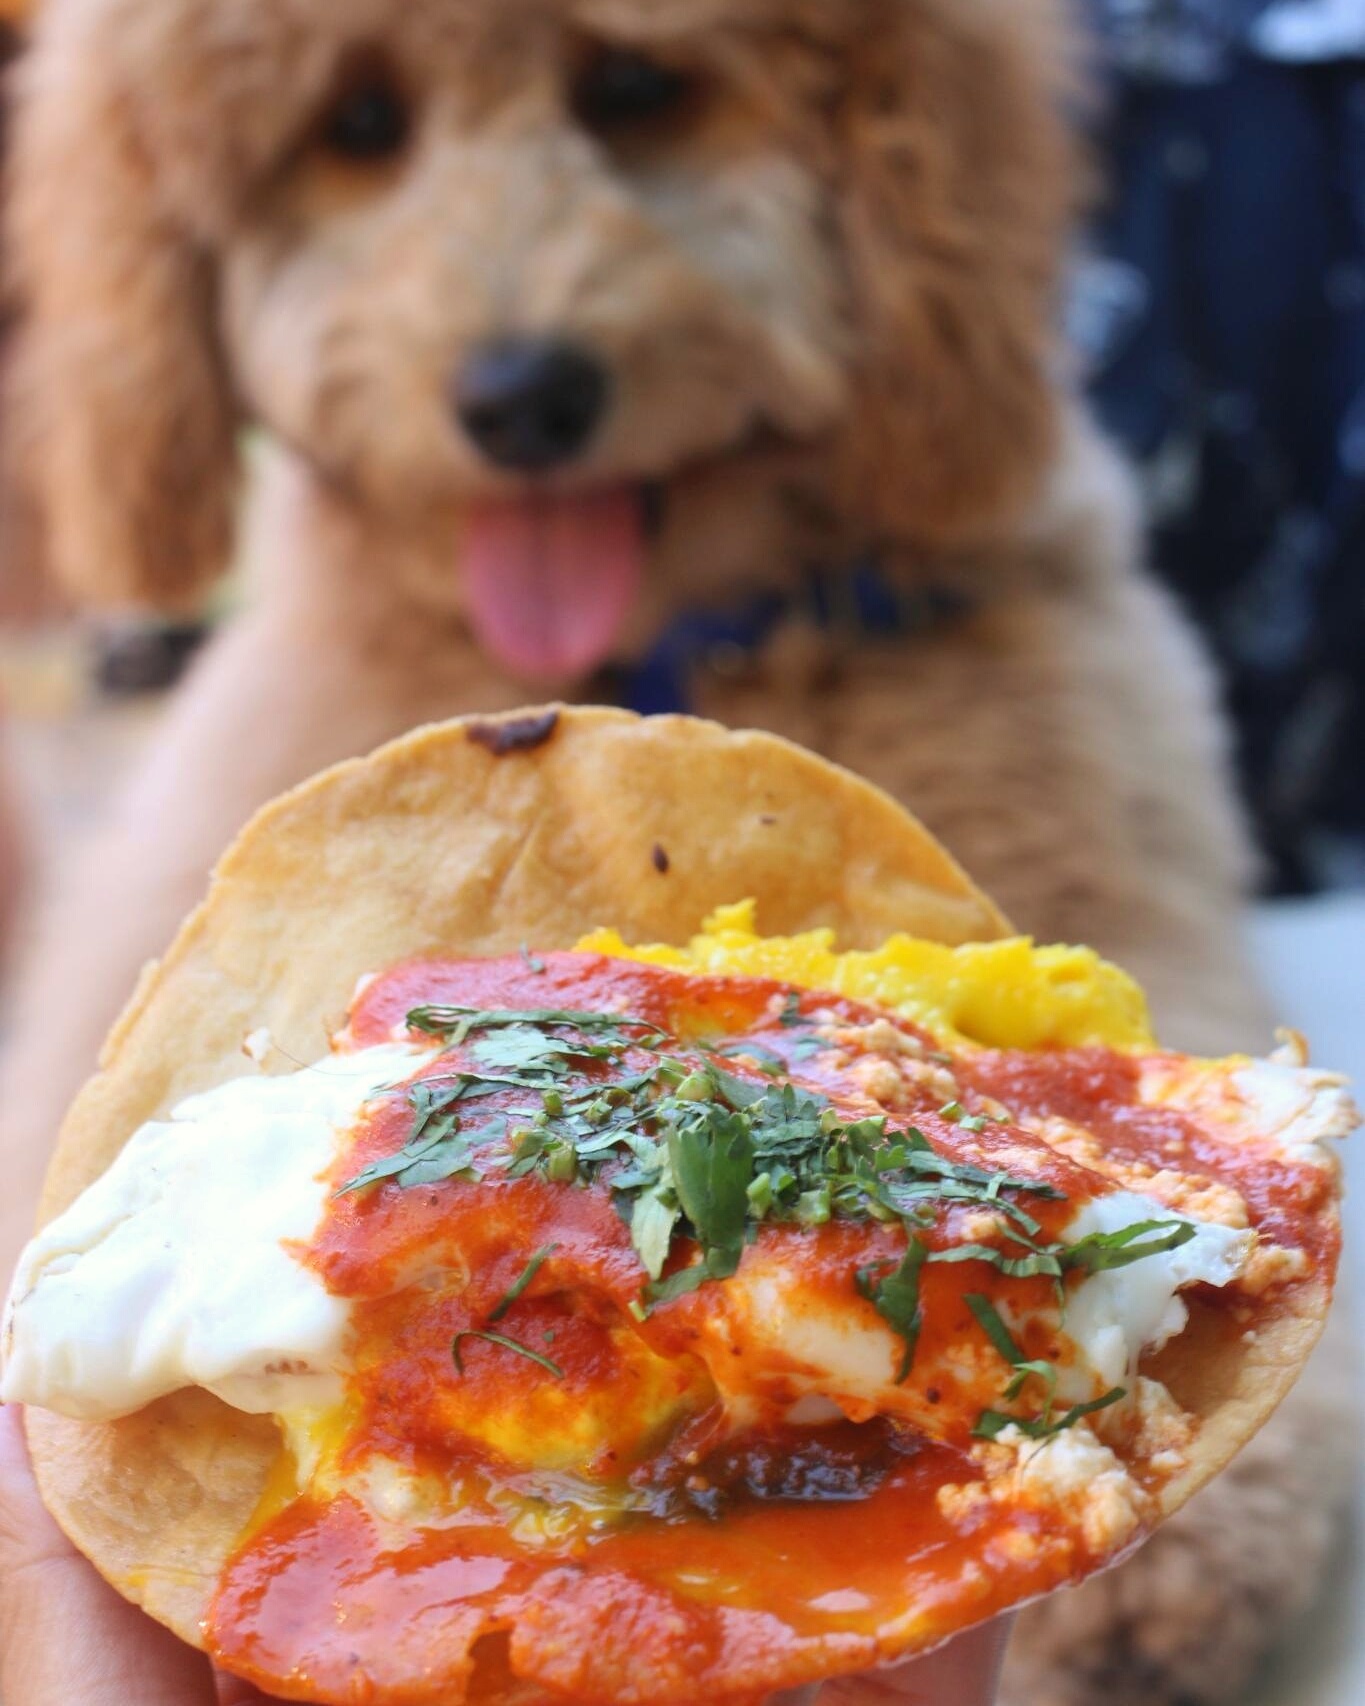 Crosby the Goldendoodle 🐶 F1B Petite Goldendoodle 🎂 Born 12/18/15 🗽 Chewing everything in NYC 🍗 Sneaking treats from @indulgenteats ✉️ crosbythedoodle@gmail.com 